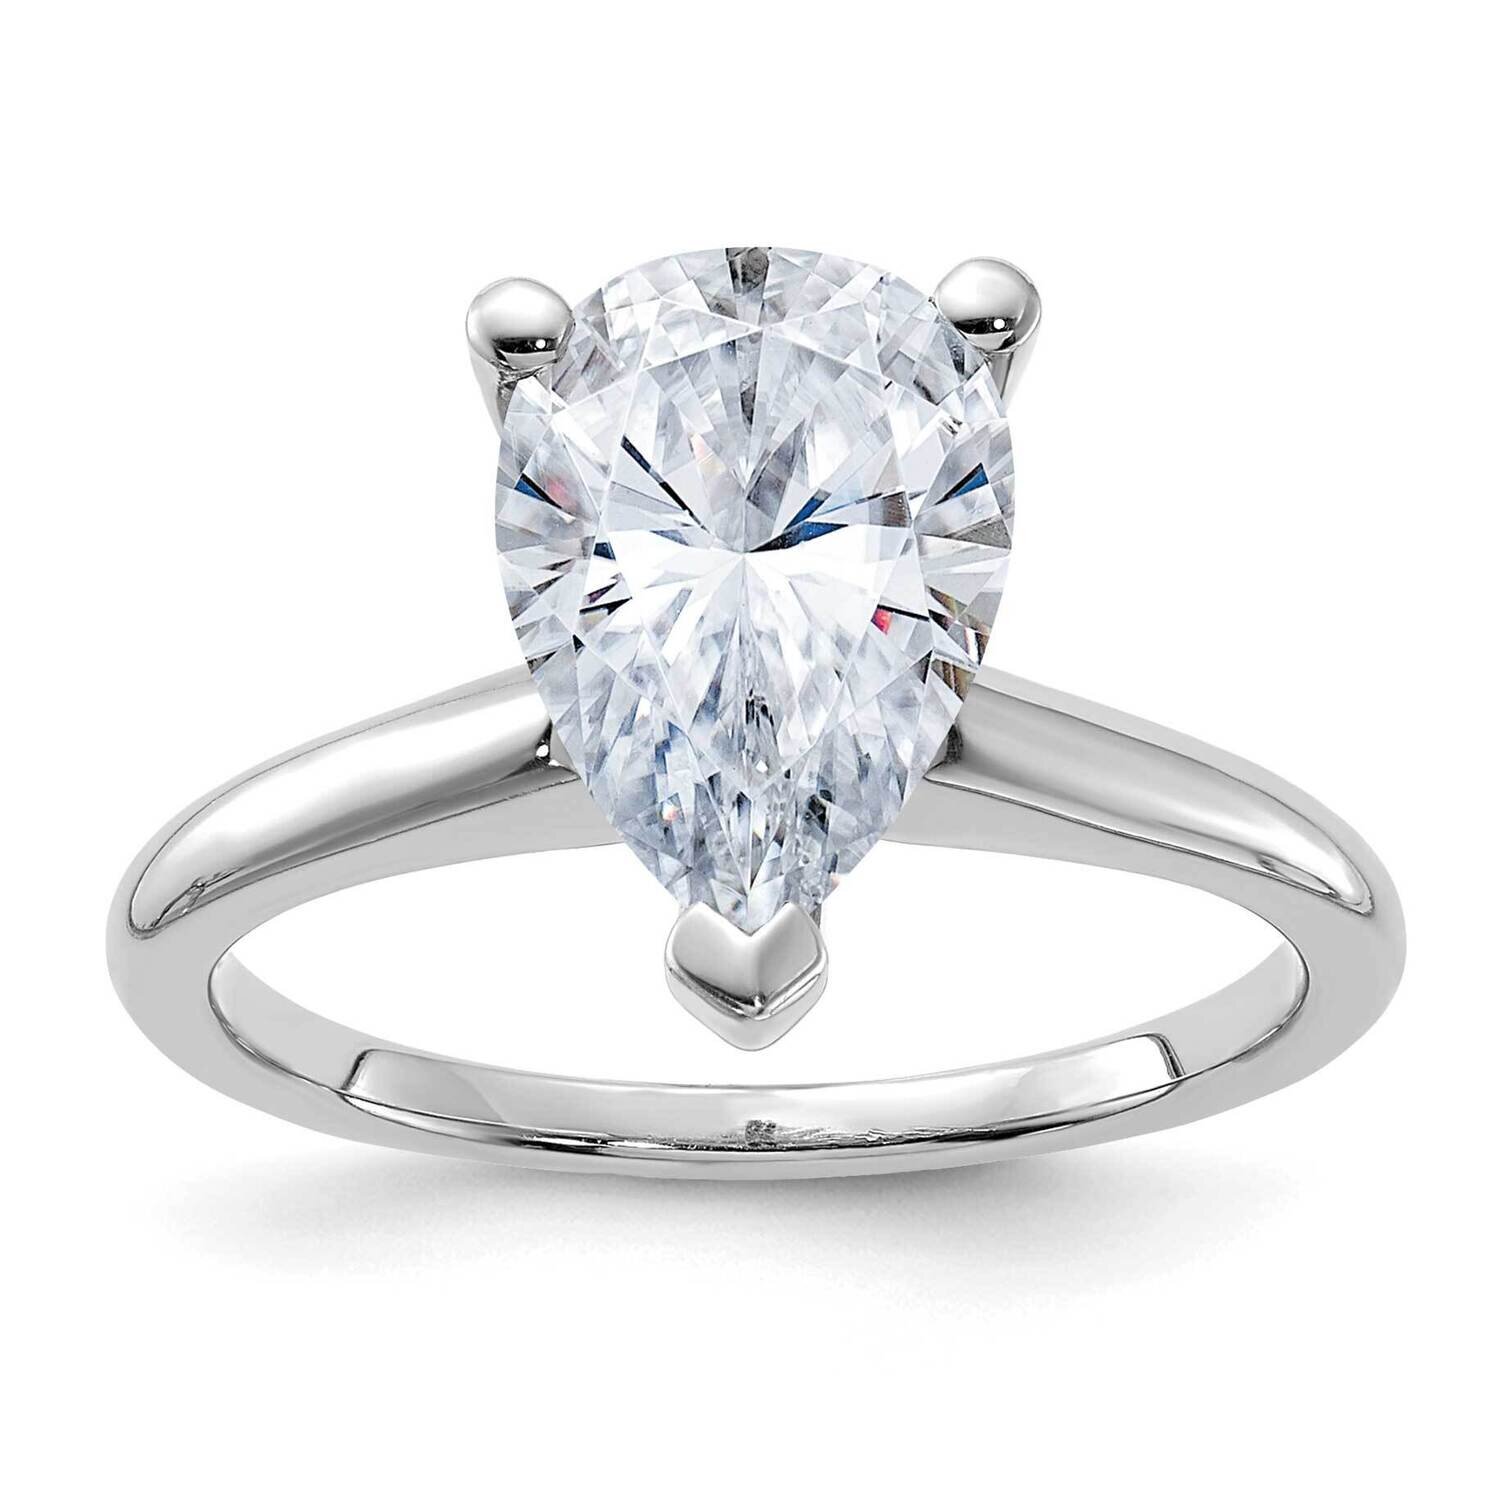 3 1/2ct. D E F Pure Light Pear Moissanite Solitaire Ring 14k White Gold RM5965WP-300-7MP